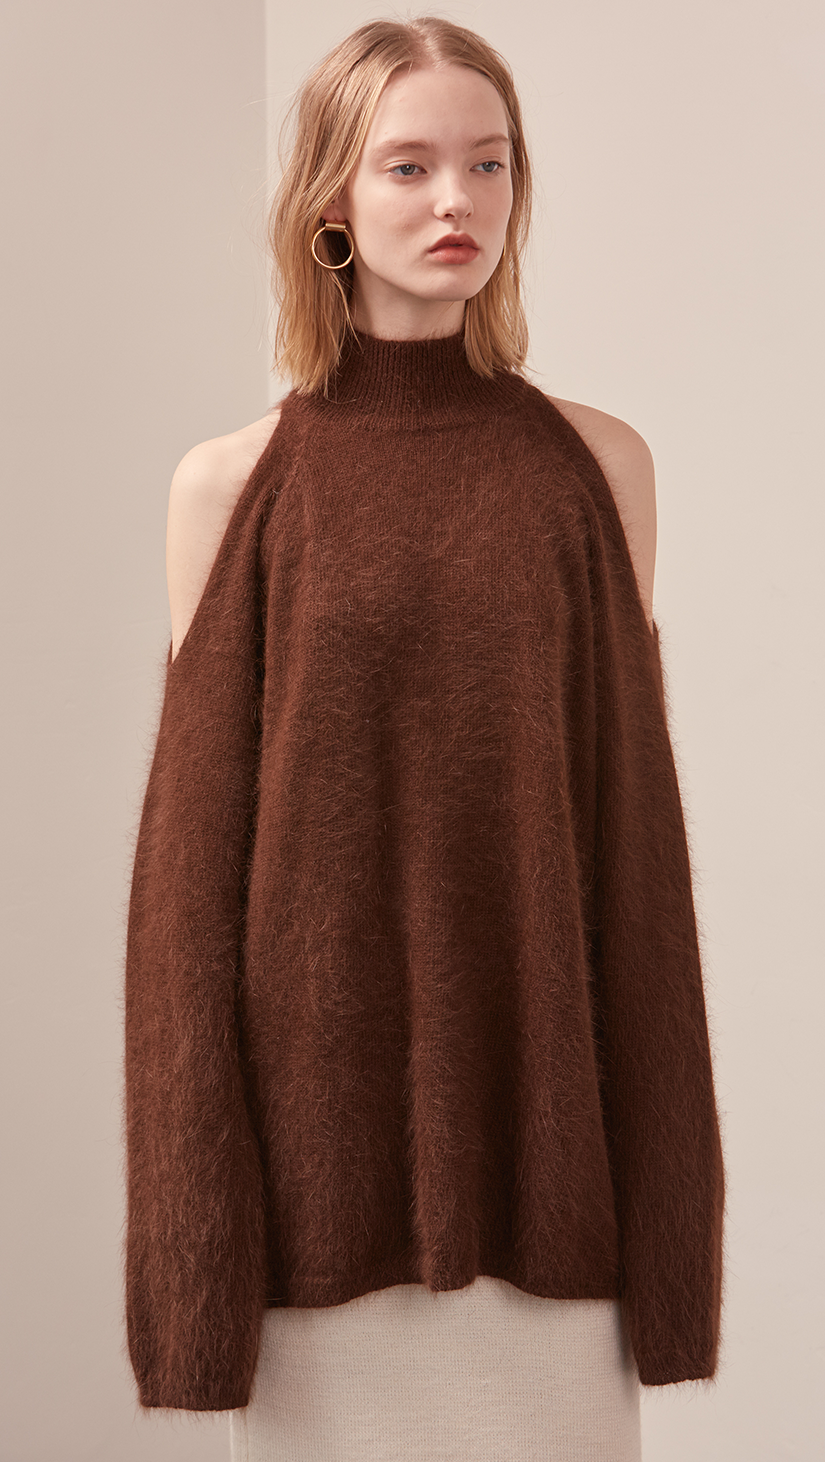 The Fella Sweater in dark brown. Features rolled neckline, long sleeves, drop shoulder, side slits. Pull on. Relaxed silhouette.